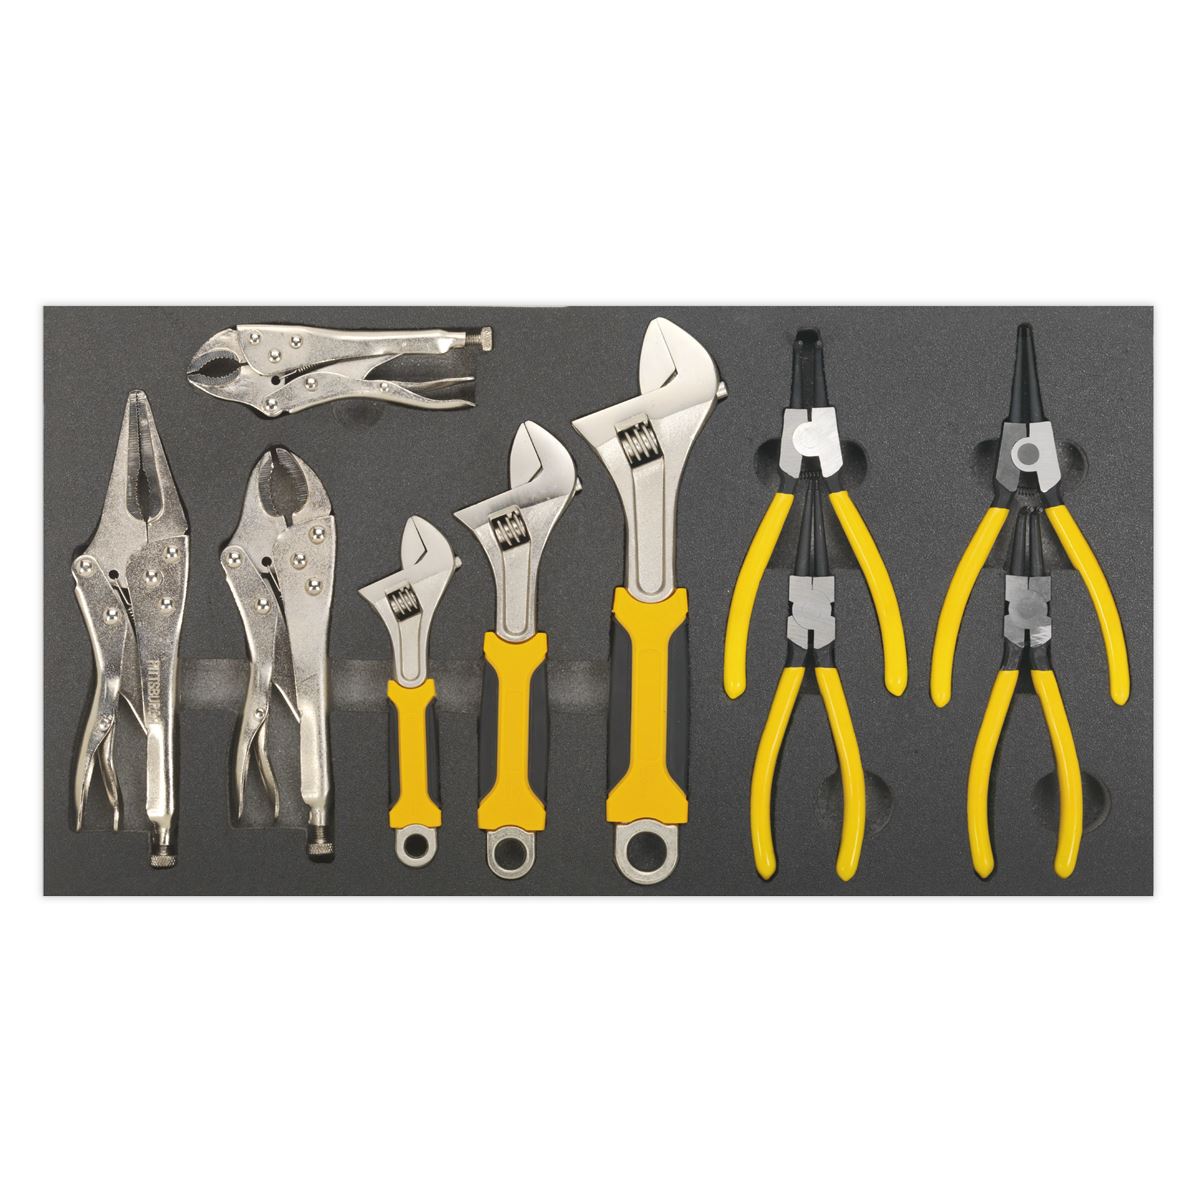 Siegen by Sealey Tool Tray with Adjustable Wrench & Pliers Set 10pc